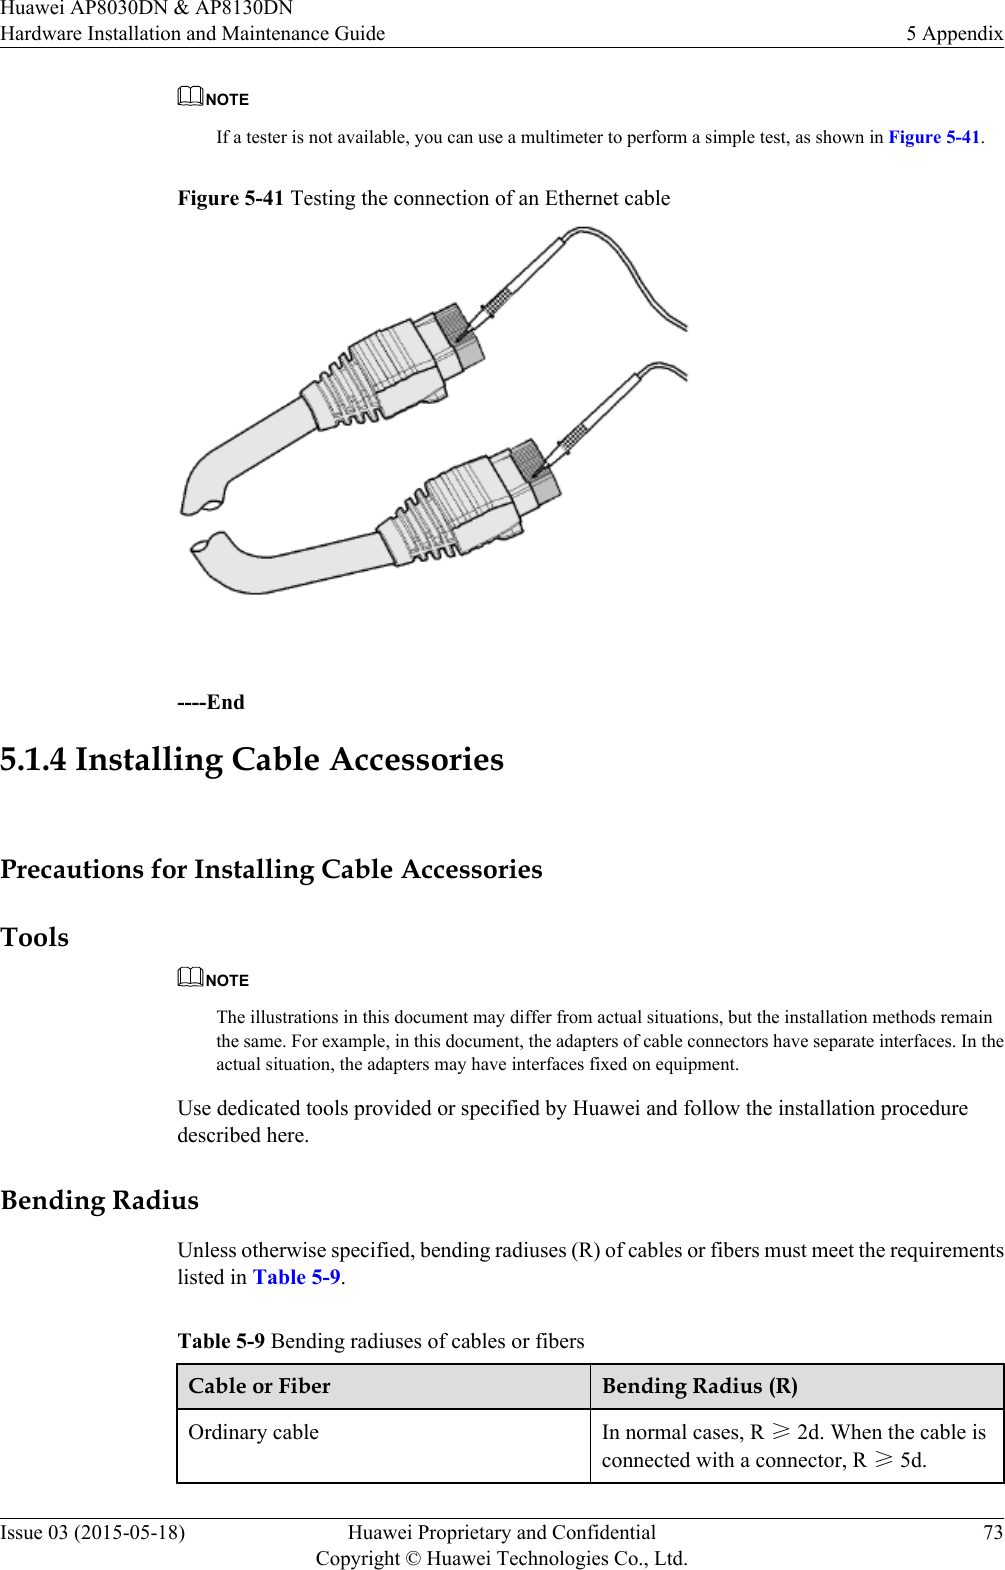 NOTEIf a tester is not available, you can use a multimeter to perform a simple test, as shown in Figure 5-41.Figure 5-41 Testing the connection of an Ethernet cable ----End5.1.4 Installing Cable AccessoriesPrecautions for Installing Cable AccessoriesToolsNOTEThe illustrations in this document may differ from actual situations, but the installation methods remainthe same. For example, in this document, the adapters of cable connectors have separate interfaces. In theactual situation, the adapters may have interfaces fixed on equipment.Use dedicated tools provided or specified by Huawei and follow the installation proceduredescribed here.Bending RadiusUnless otherwise specified, bending radiuses (R) of cables or fibers must meet the requirementslisted in Table 5-9.Table 5-9 Bending radiuses of cables or fibersCable or Fiber Bending Radius (R)Ordinary cable In normal cases, R ≥ 2d. When the cable isconnected with a connector, R ≥ 5d.Huawei AP8030DN &amp; AP8130DNHardware Installation and Maintenance Guide 5 AppendixIssue 03 (2015-05-18) Huawei Proprietary and ConfidentialCopyright © Huawei Technologies Co., Ltd.73